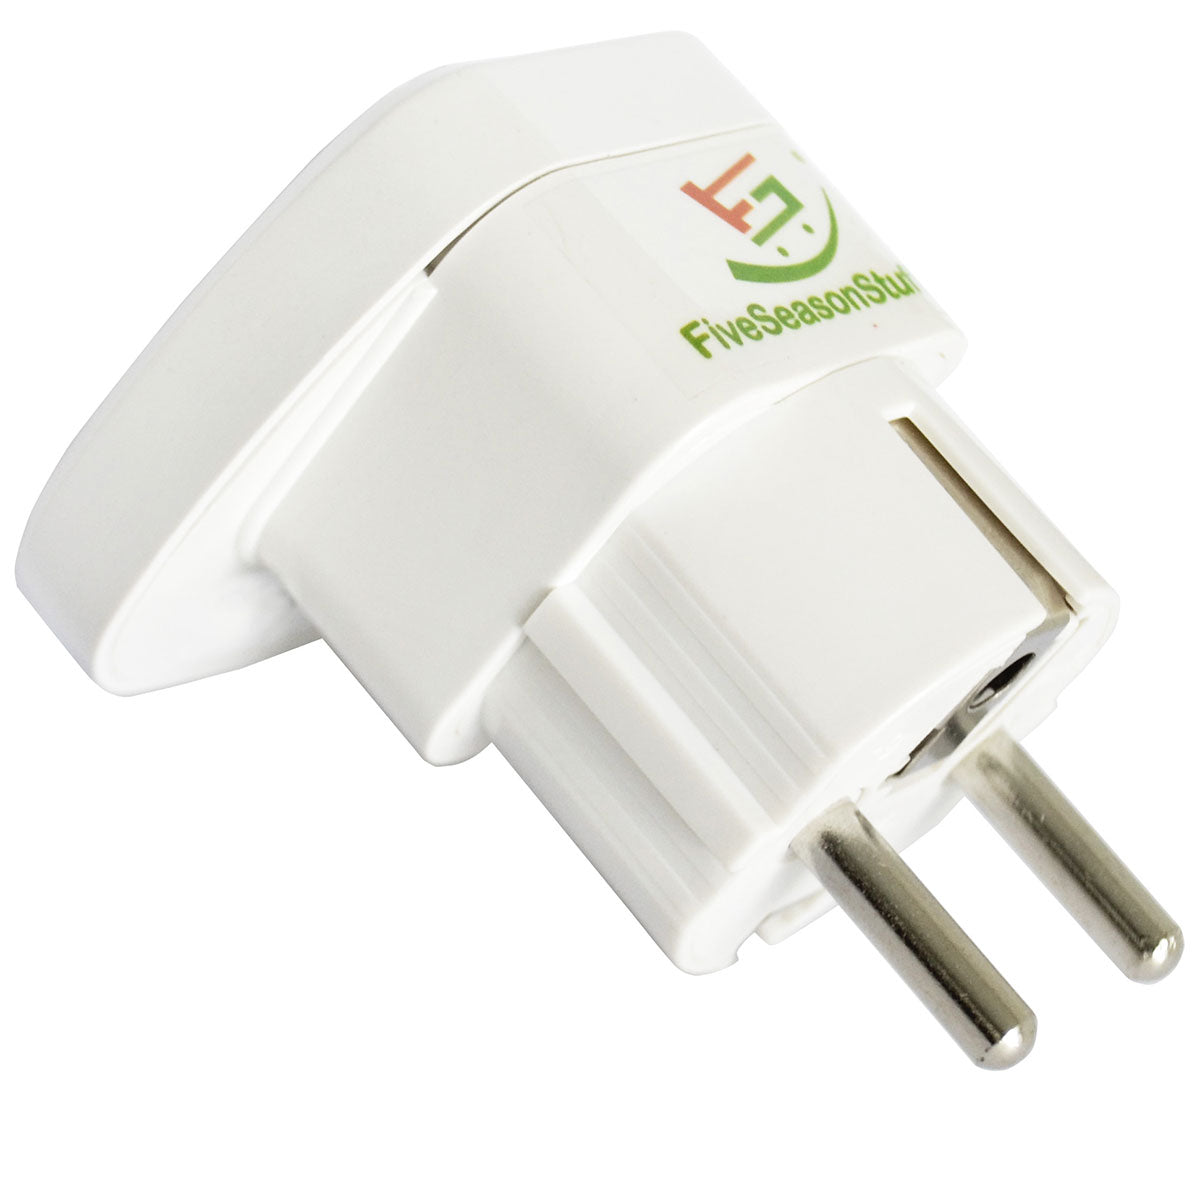 1 Travel Adapter for Traveling to Germany (Schuko, White) Type F